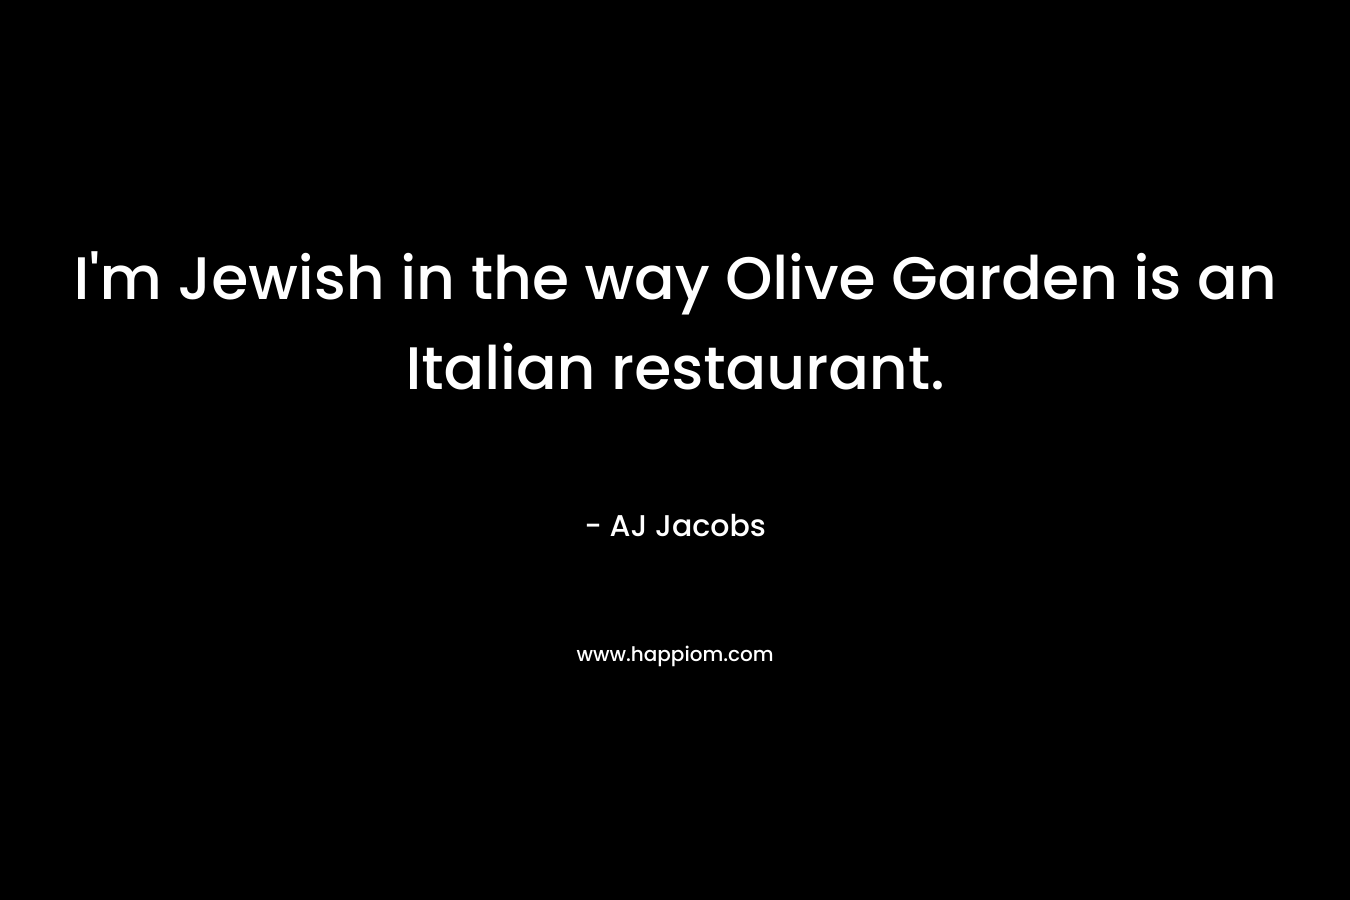 I'm Jewish in the way Olive Garden is an Italian restaurant.